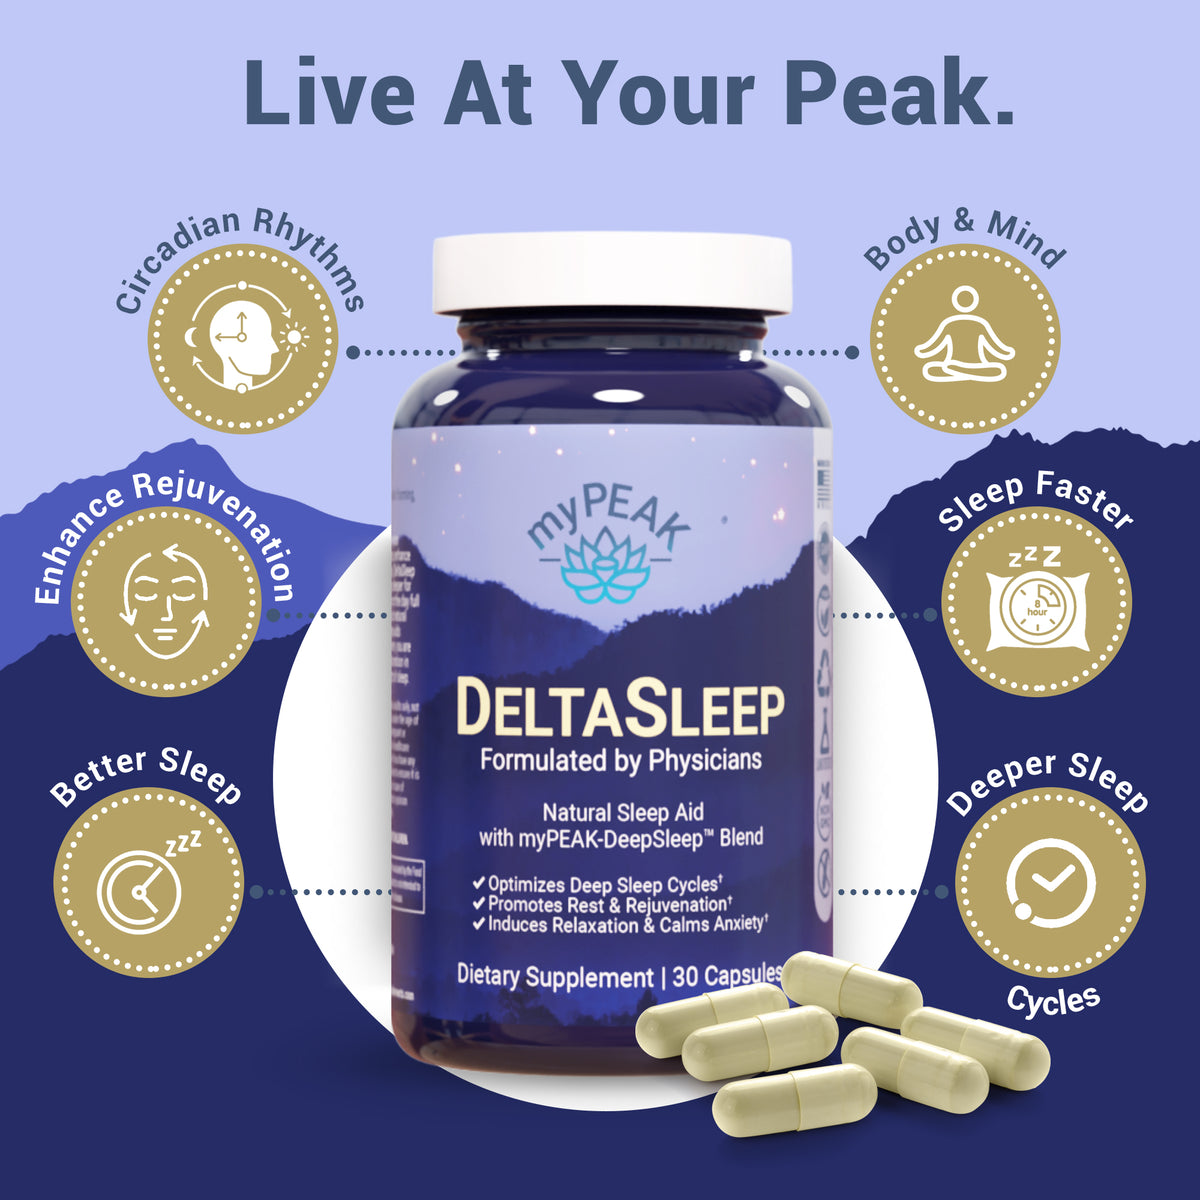 Supplements for better sleep and relaxation